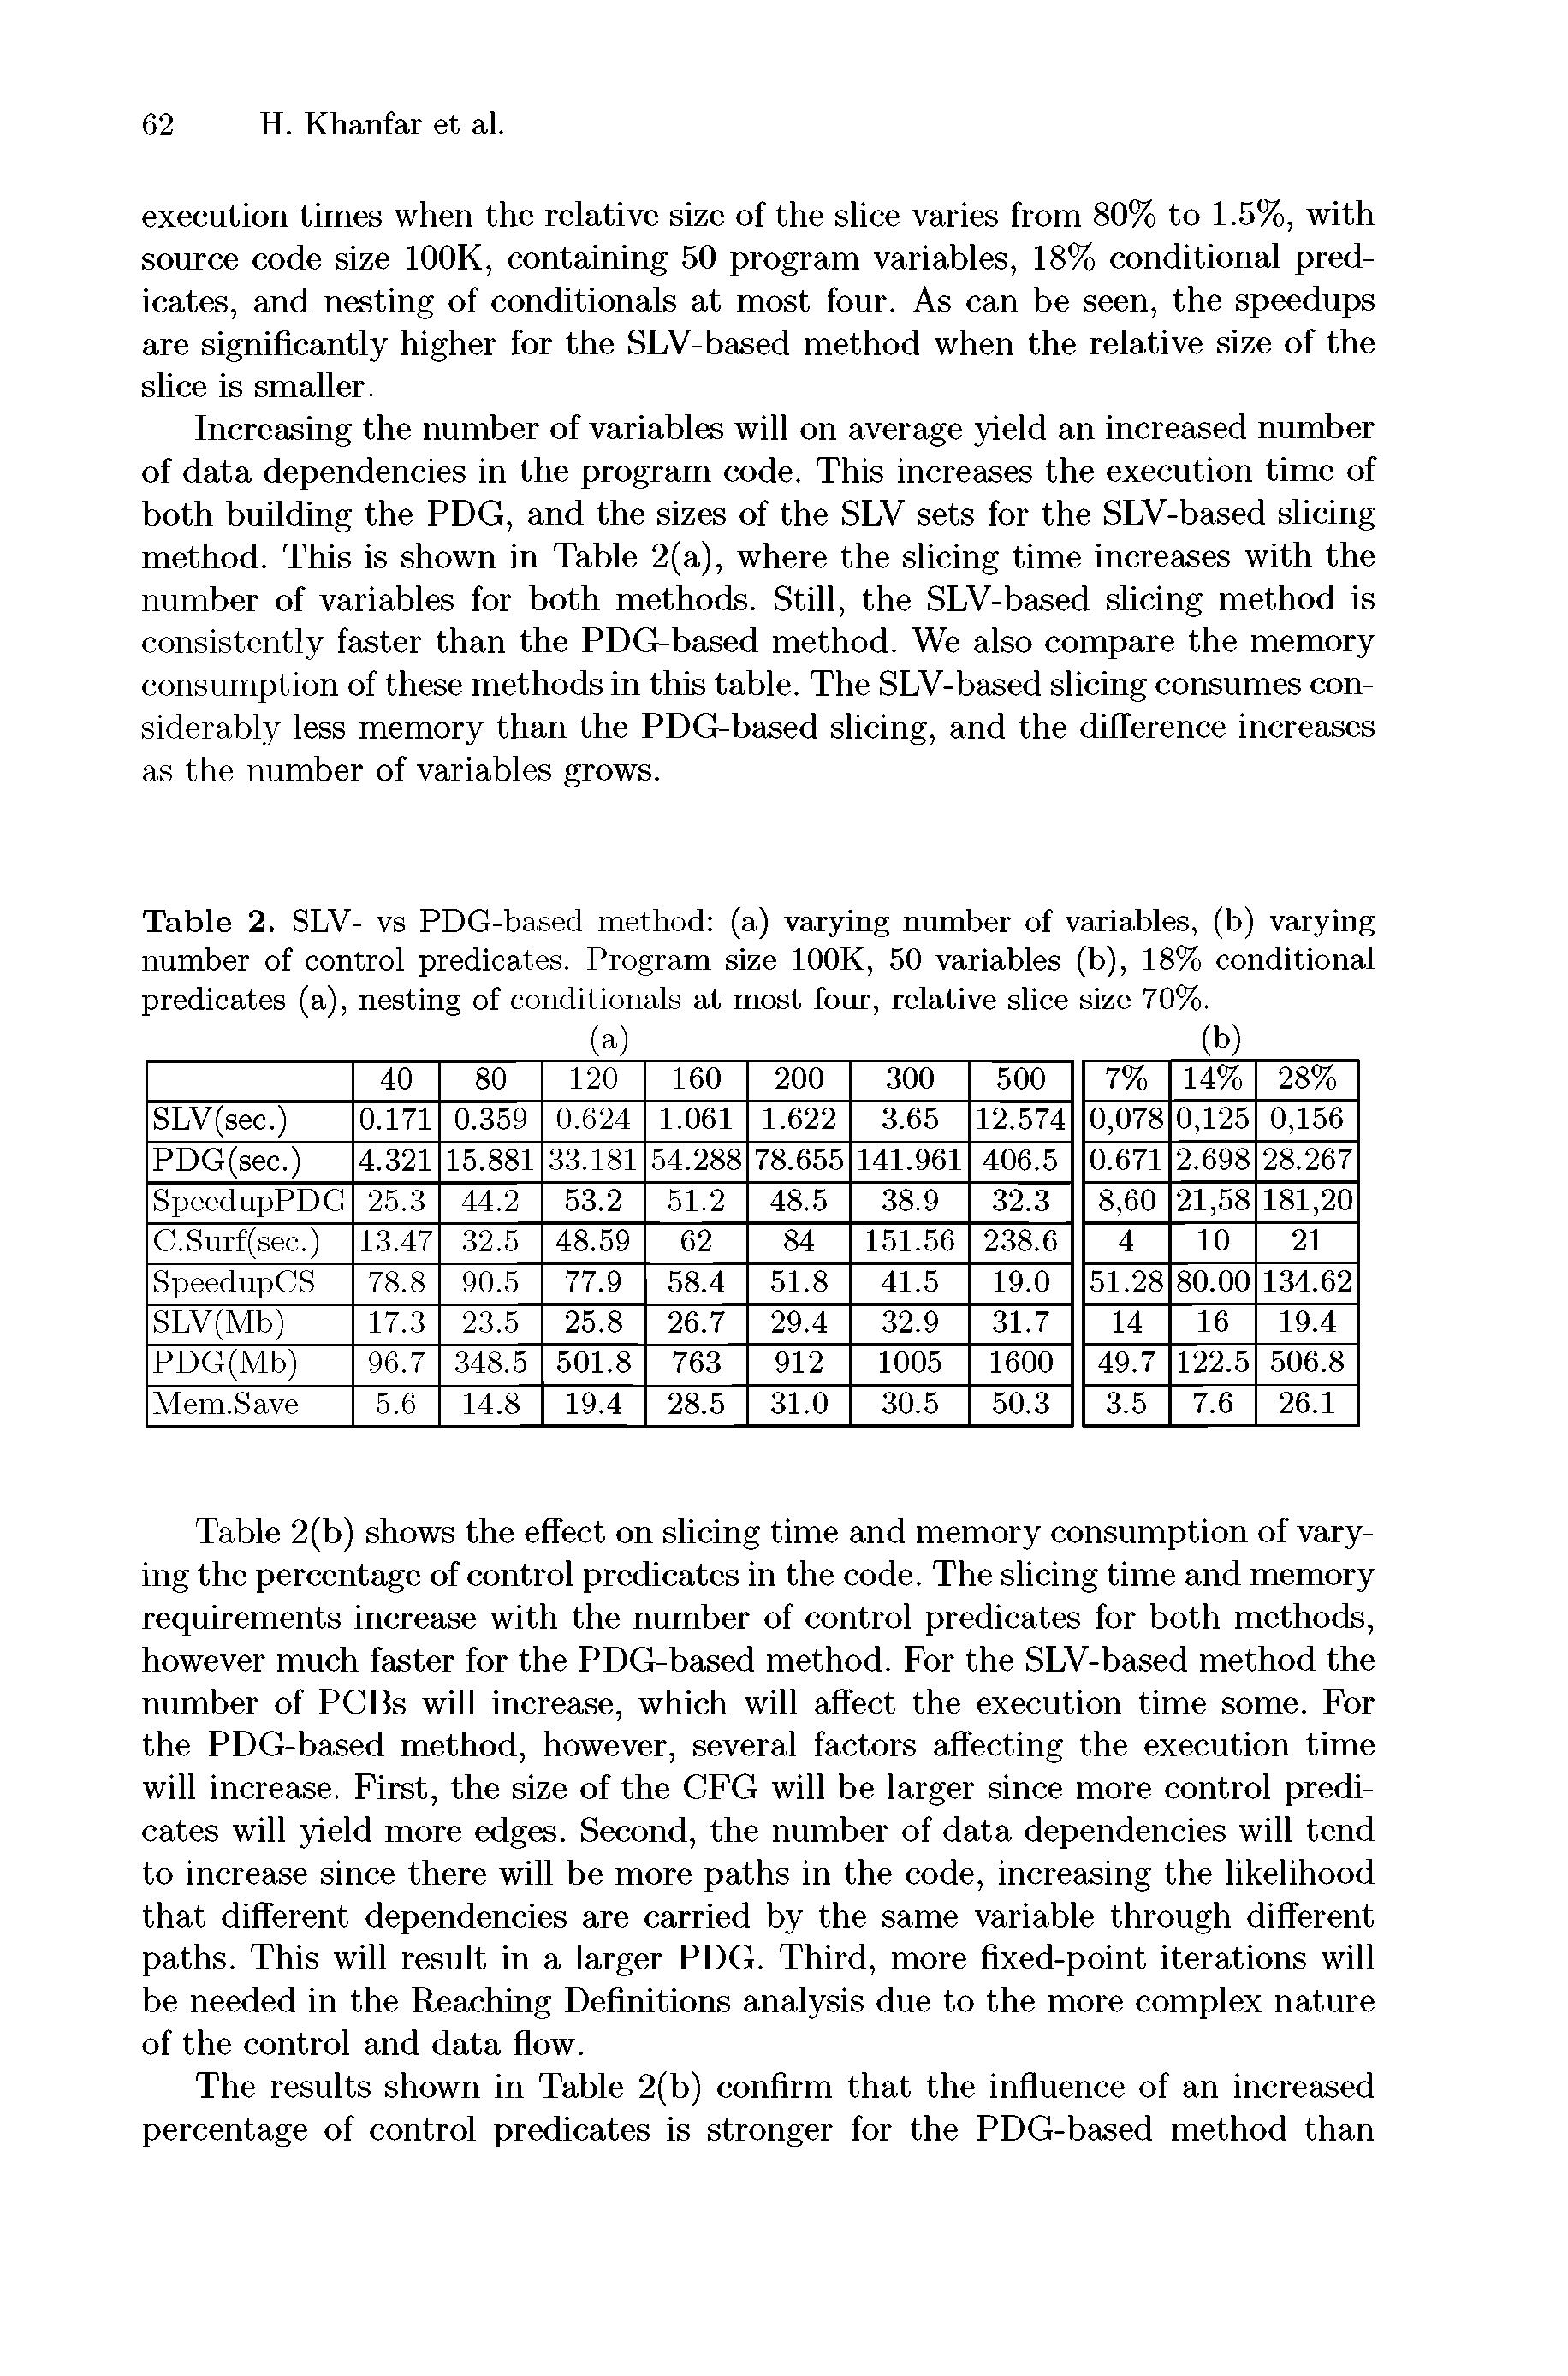 Table 2. SLV- vs PDG-based method (a) varying number of variables, (b) varying number of control predicates. Program size lOOK, 50 variables (b), 18% conditional predicates (a), nesting of conditionals at most four, relative slice size 70%.